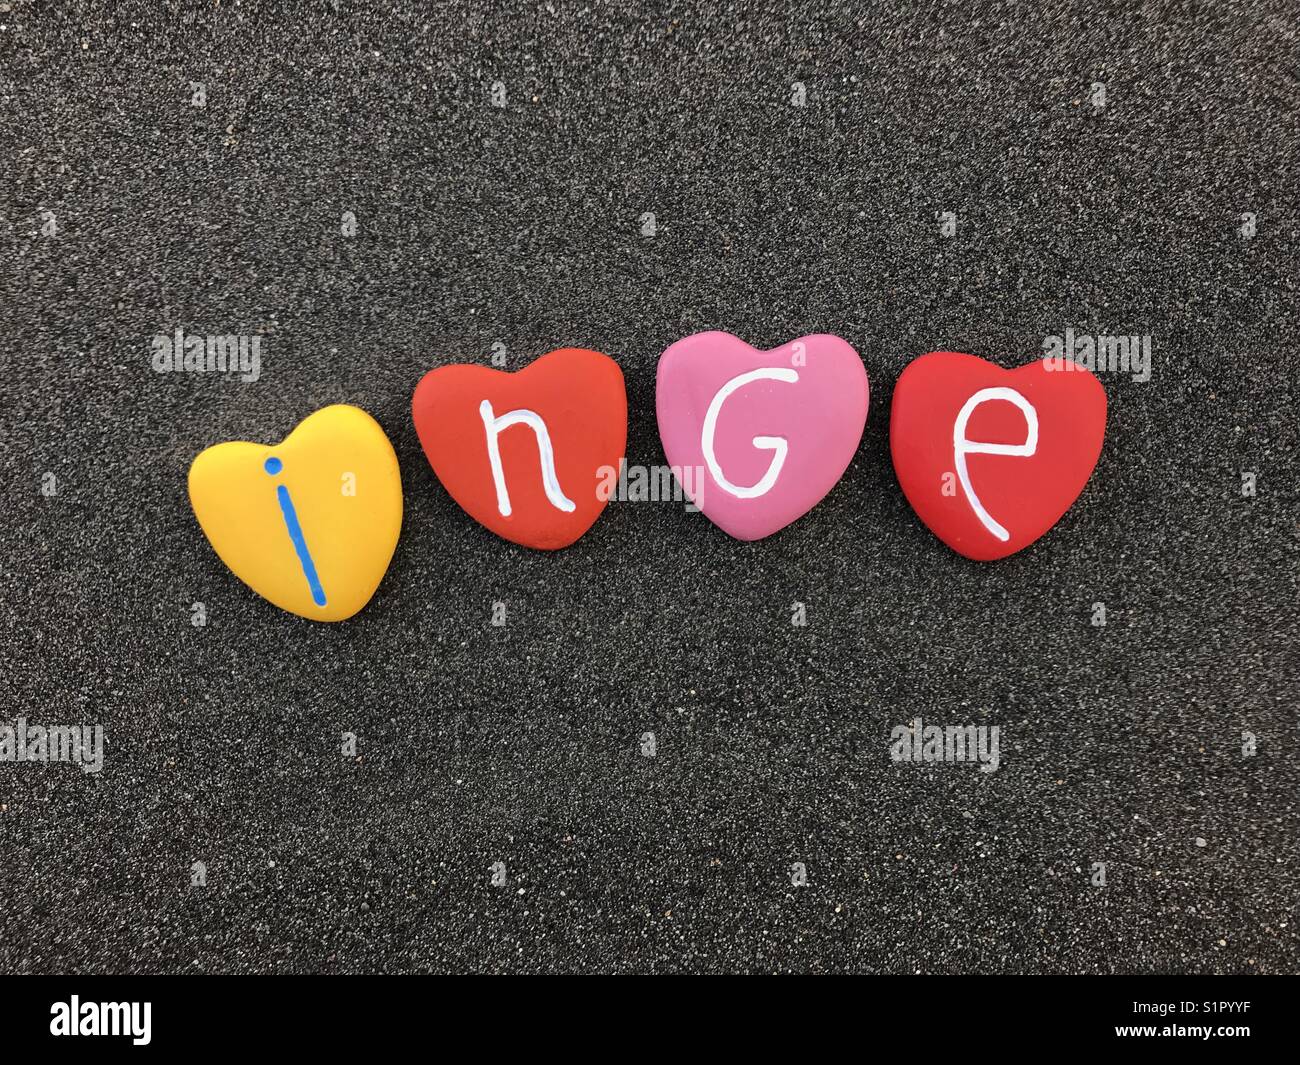 Inge, feminine given name with colored heart stones over black volcanic sand Stock Photo